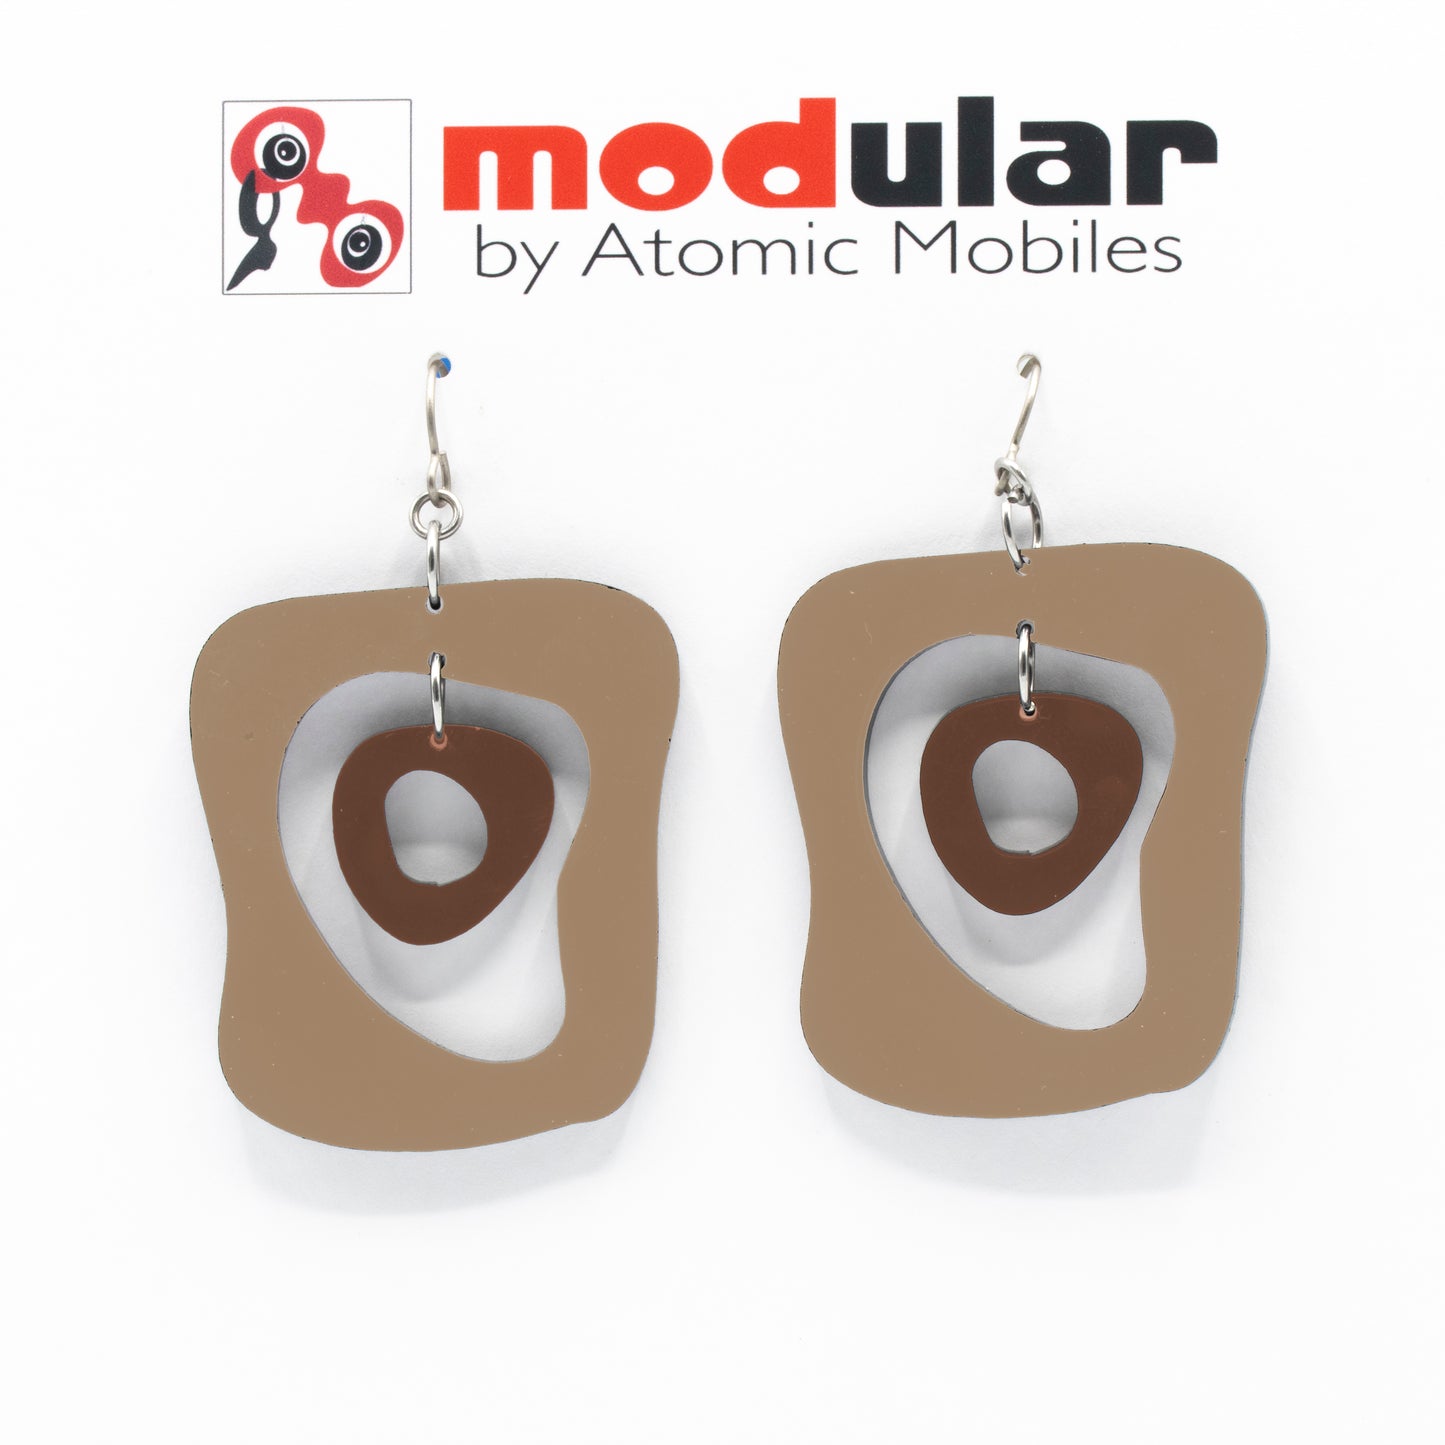 MODular Earrings - Mid Mod Statement Earrings in Beige Tan and Brown by AtomicMobiles.com - mid century inspired modern art dangle earrings